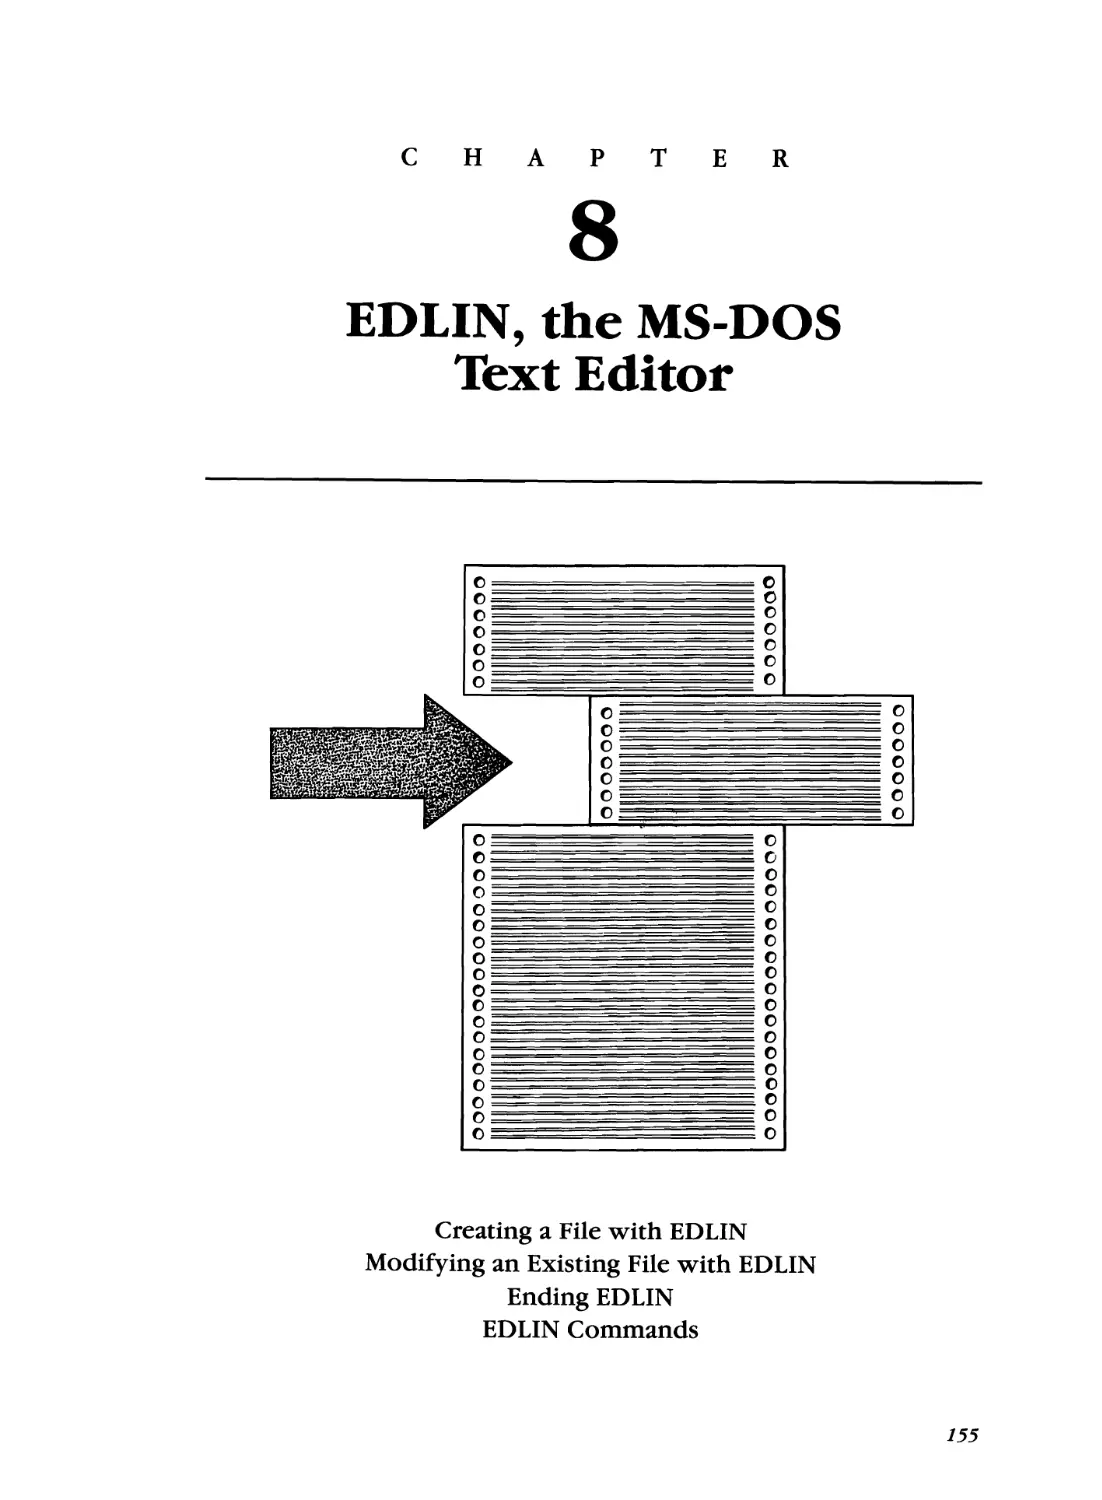 Chapter 8 - EDLIN, the MS-DOS Text Editor